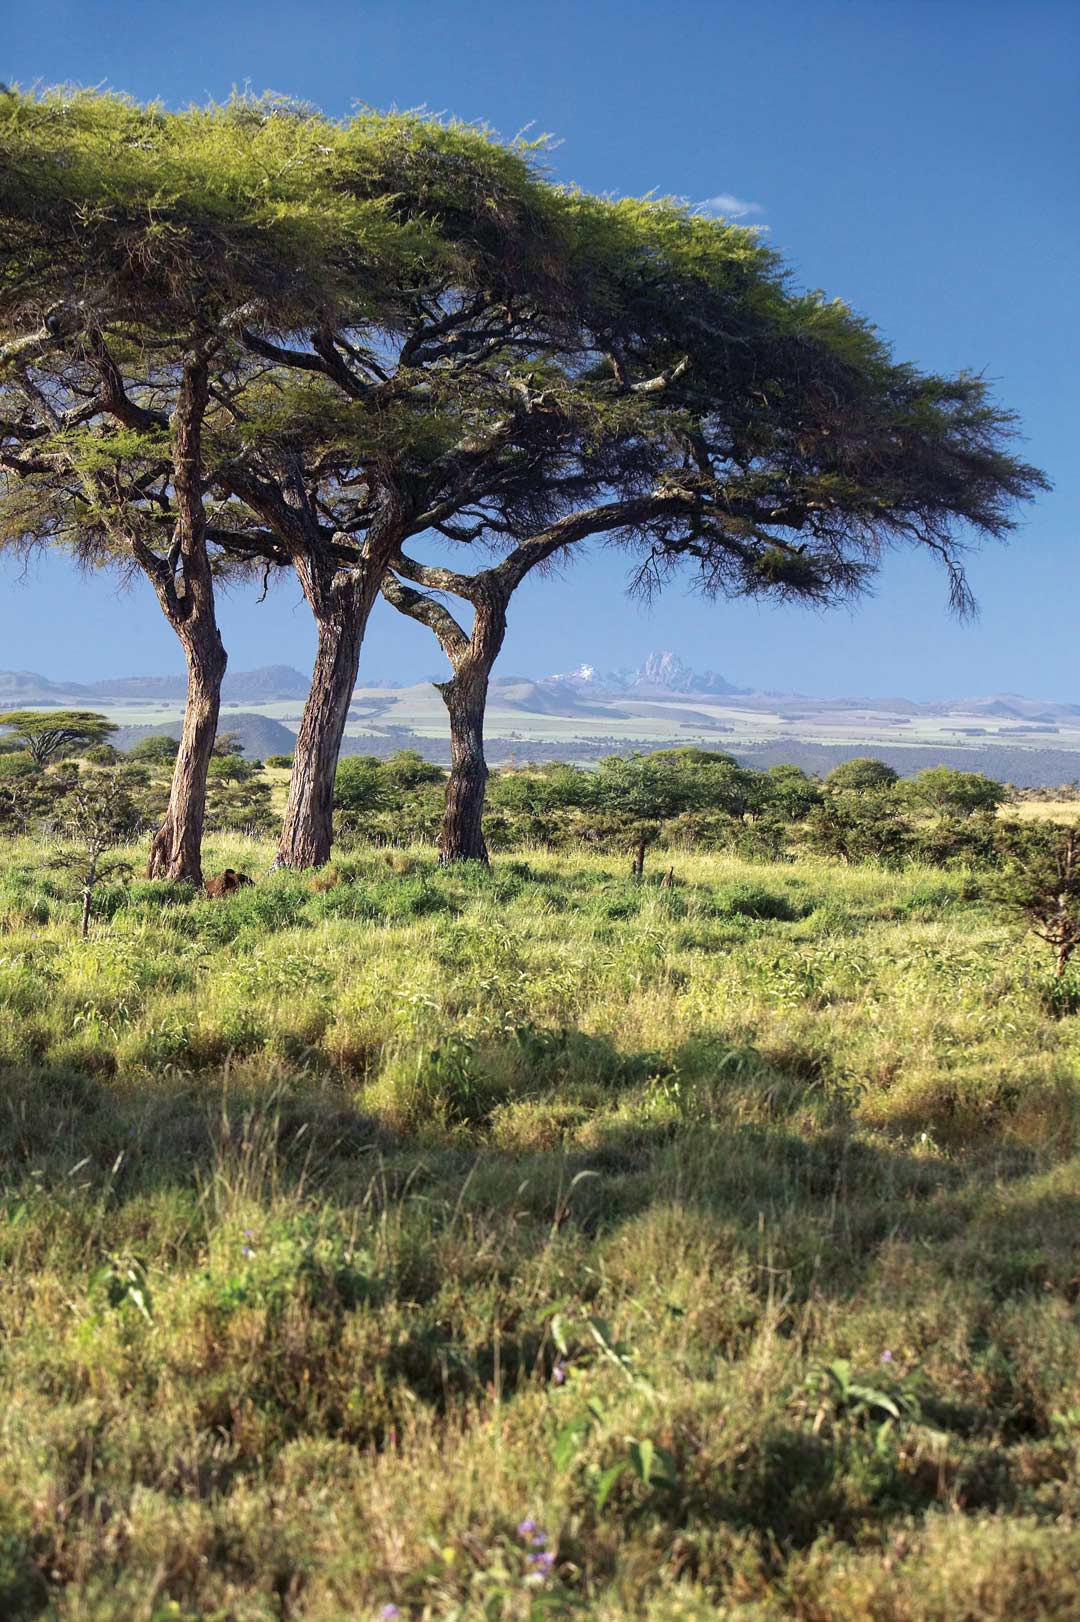 A view across the grasslands of Lewa Conservancy to the rugged peaks of Mount Kenya.